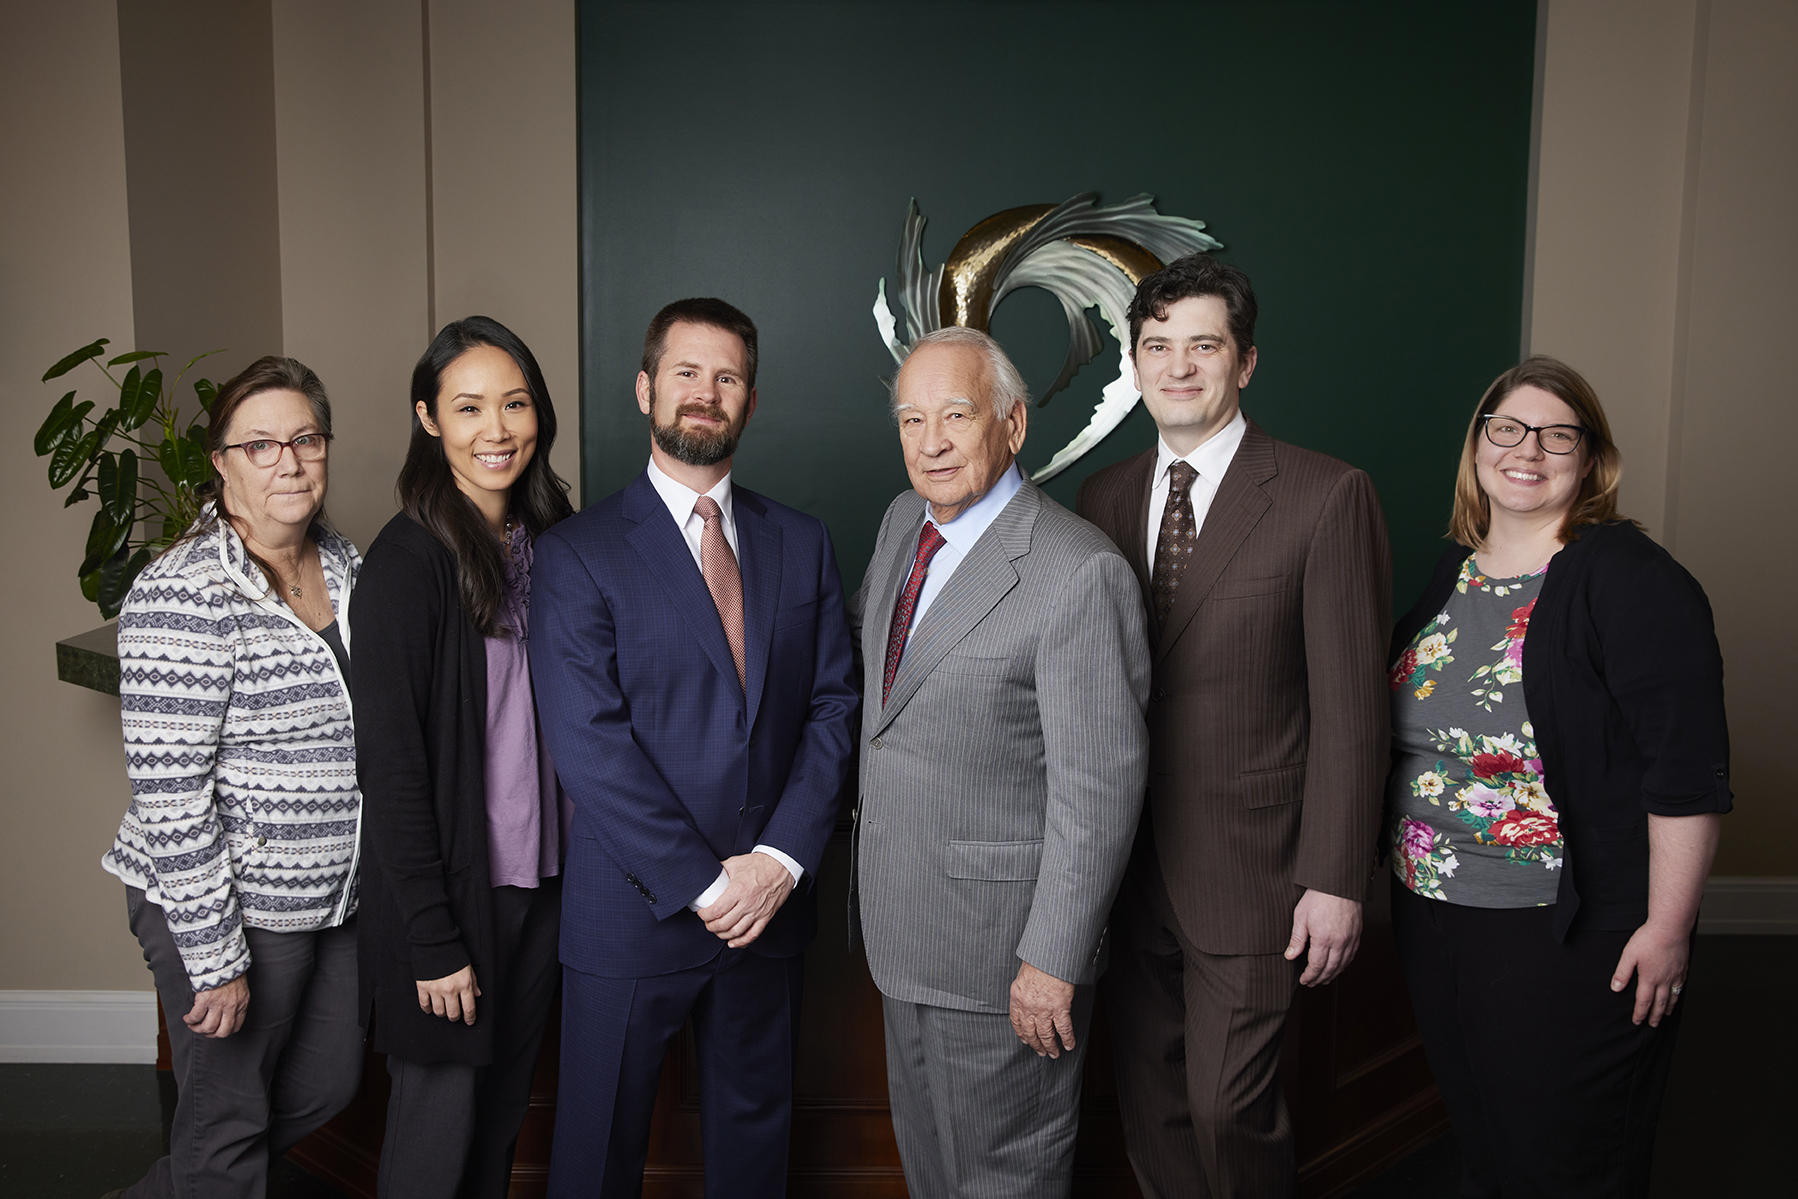 Experienced Attorneys at John James Law Group